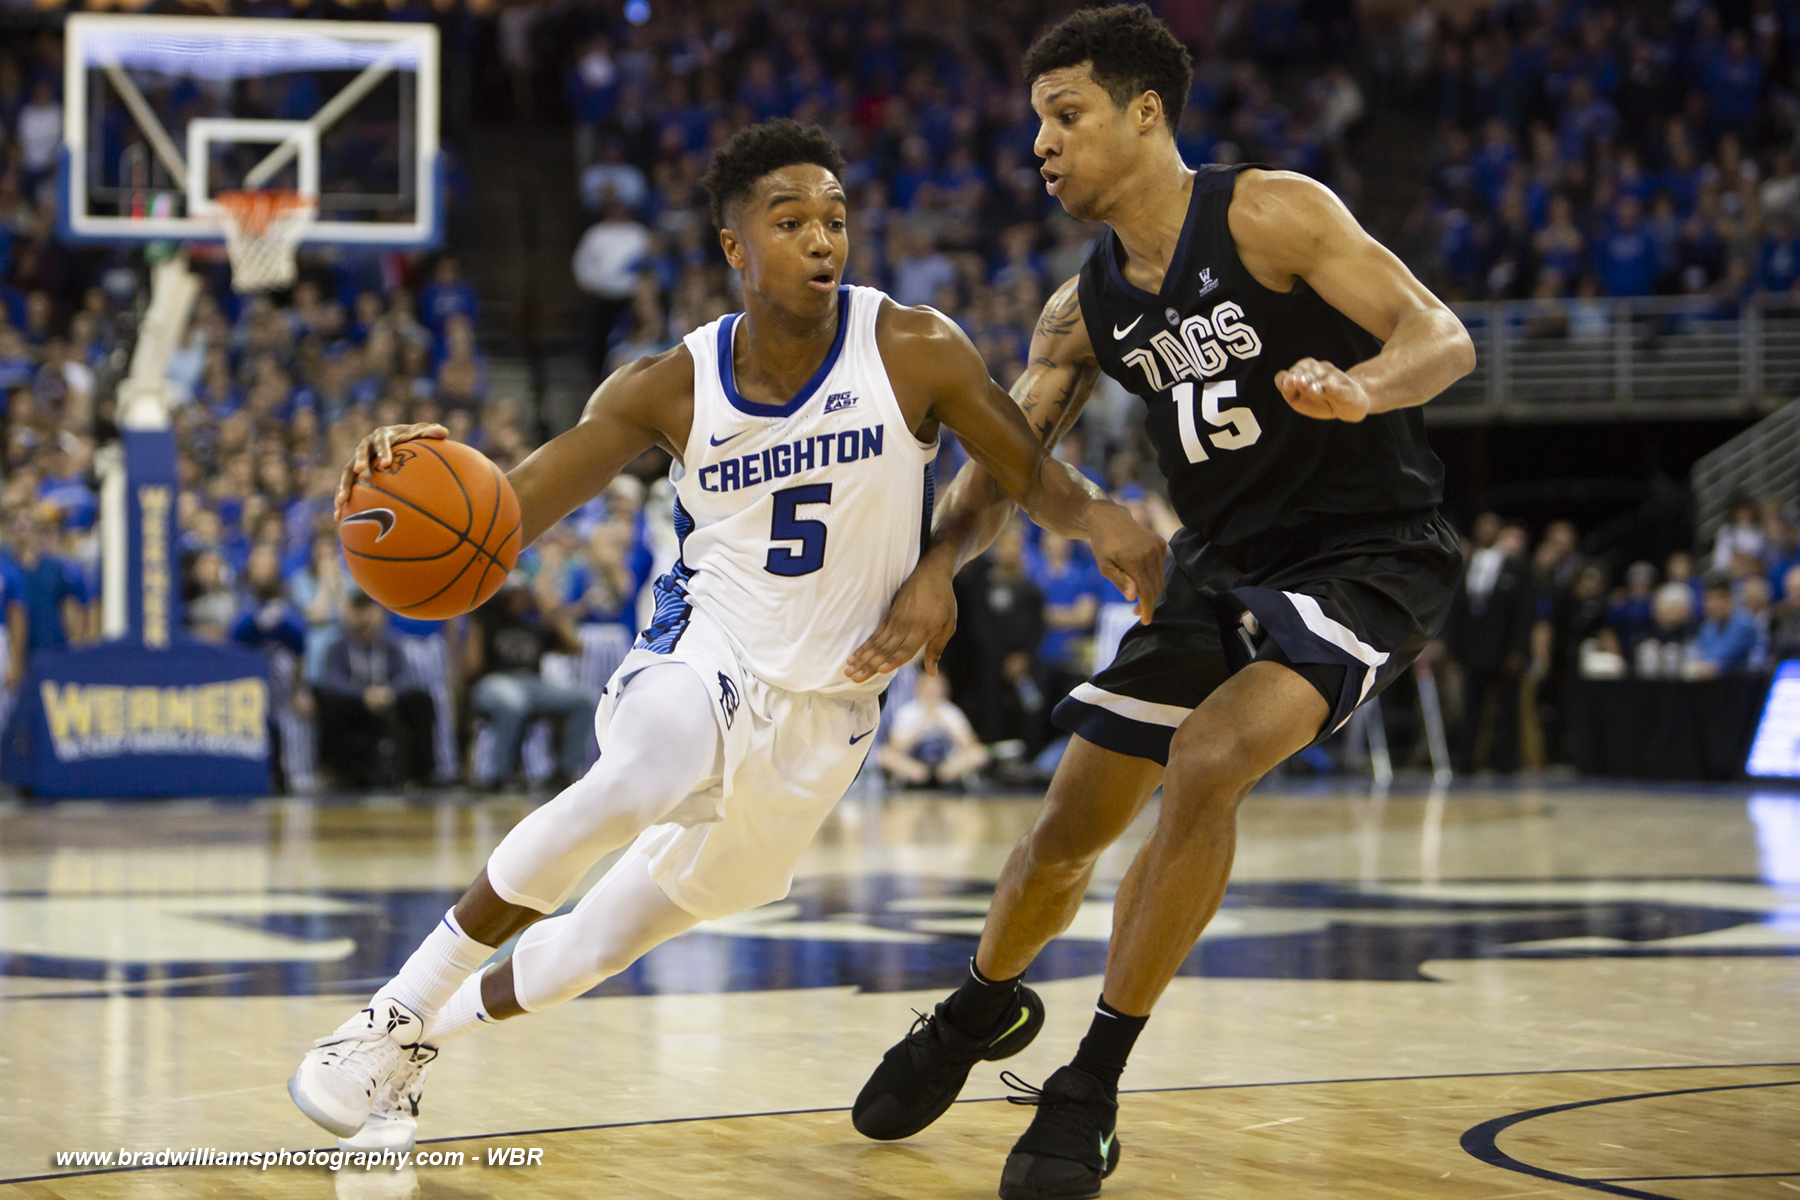 Creighton sophomore Ty-Shon Alexander sidelined at Villanova with injury